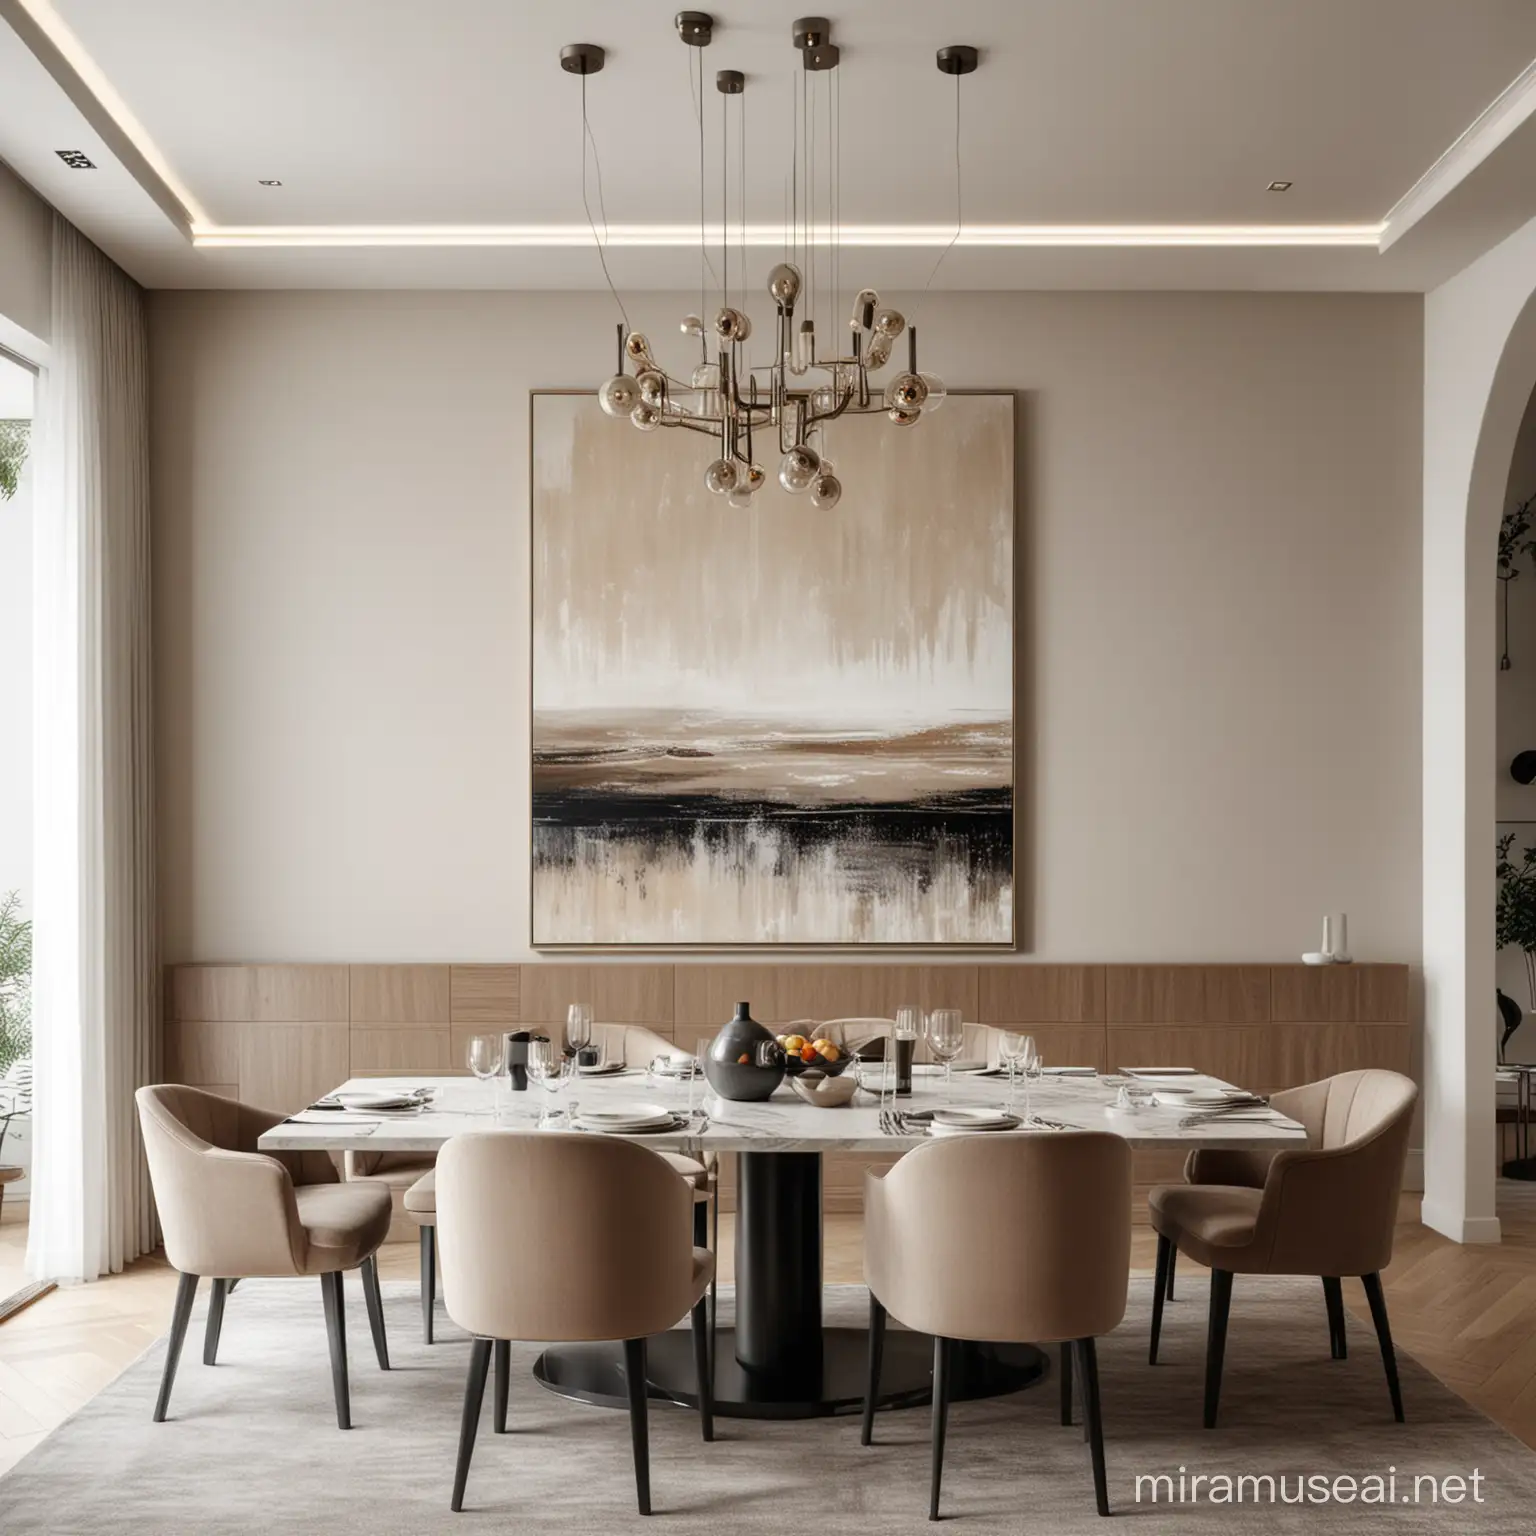 Luxury Dining Room with Contemporary Art in Neutral Tones